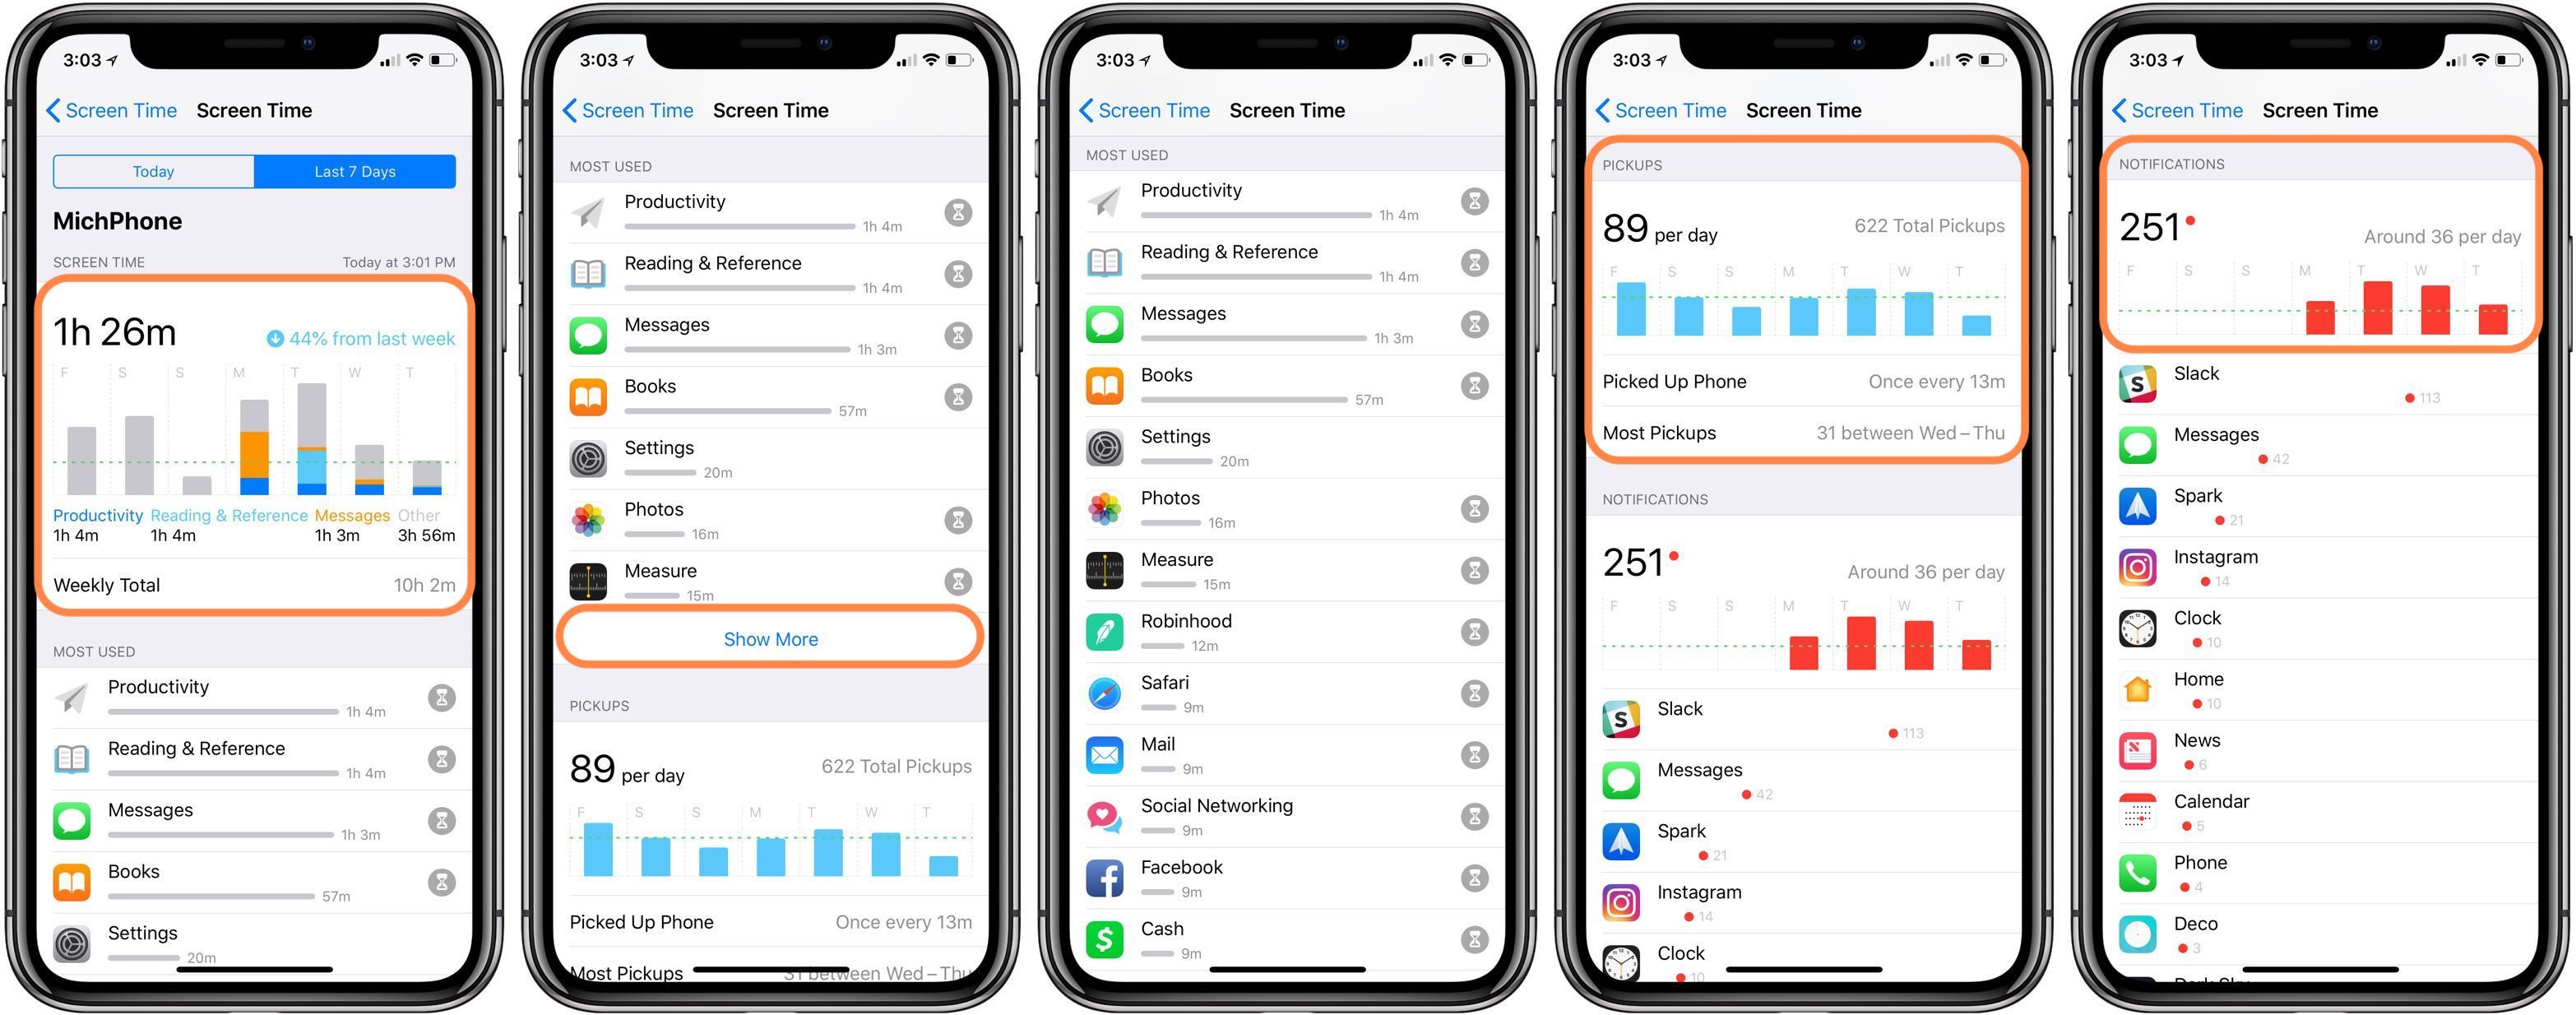 iOS 12: How to Use Screen Time on iPhone and iPad?